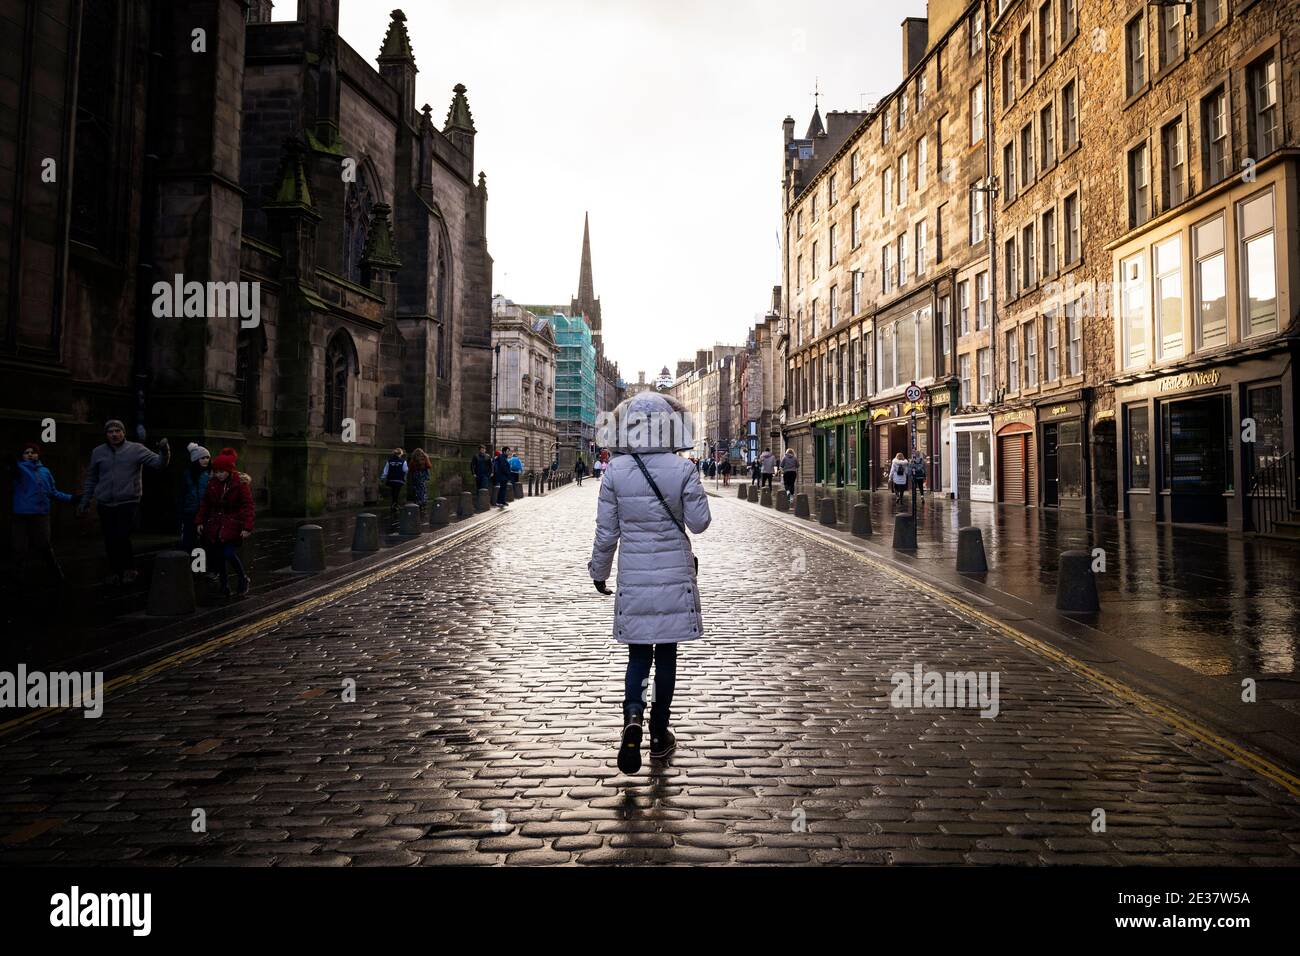 Edinburgh, Scotland, UK. 17 January 2021. On first Sunday after tightening of national lockdown rules in Scotland the streets of the Old town in Edinburgh City Centre remain very quiet with no shops open and only a couple of cafes offering takeaway drinks and food.   Iain Masterton/Alamy Live News Stock Photo